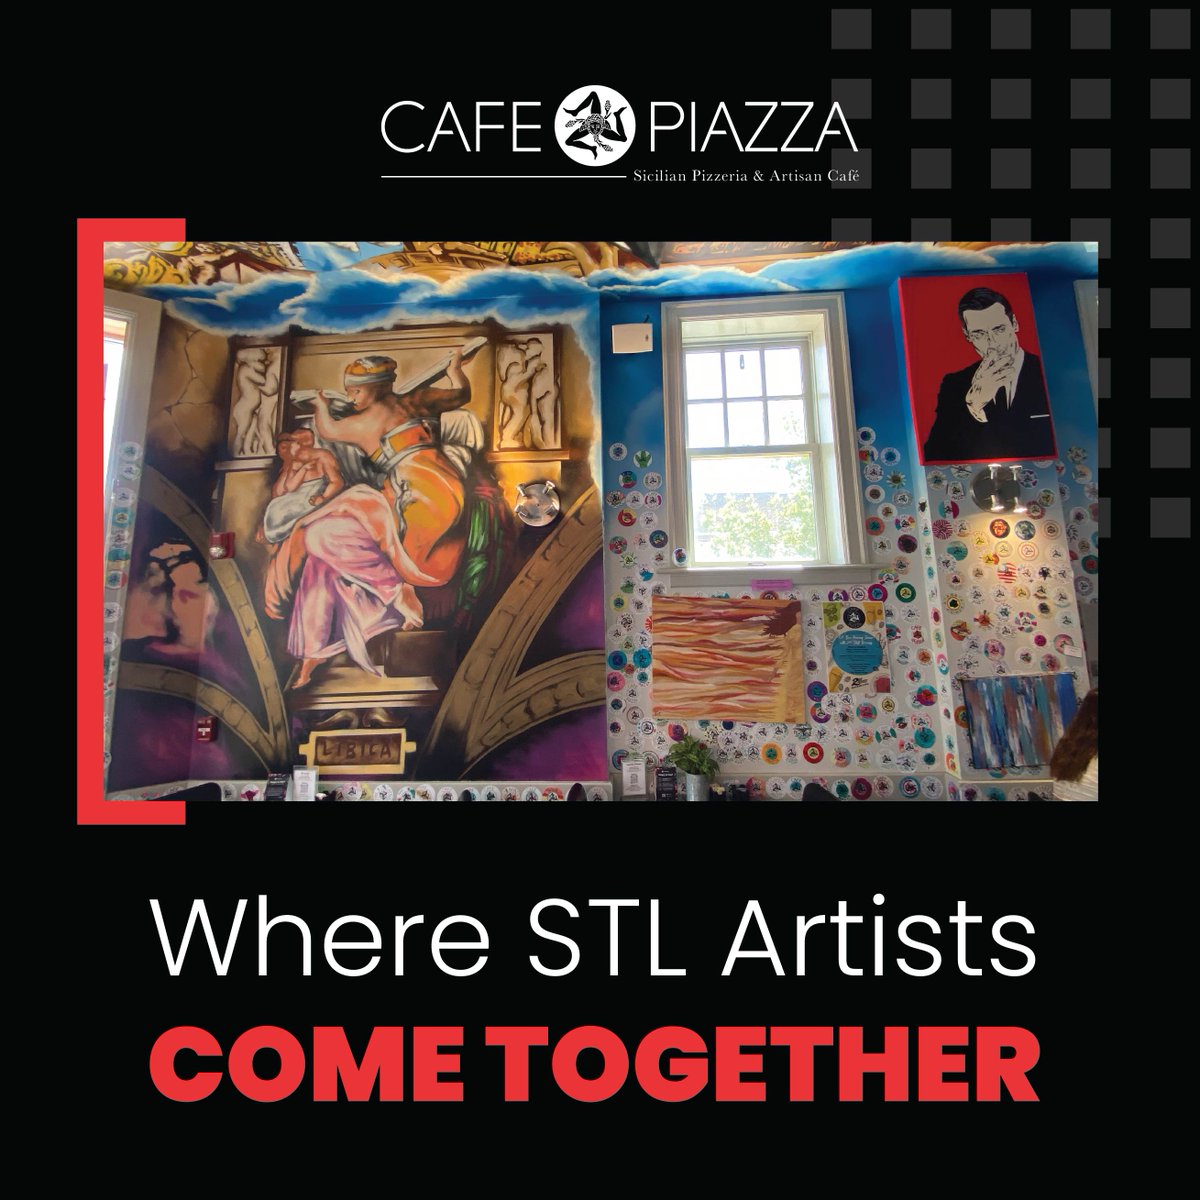 Cafe Piazza is not just a feast for the palate, but a canvas for local talent. Reach out to us to showcase your art, and we'll turn our walls into your gallery. Let your creativity shine as our patrons indulge in both culinary and artistic delights! #STLArt #CafePiazzaArtScene